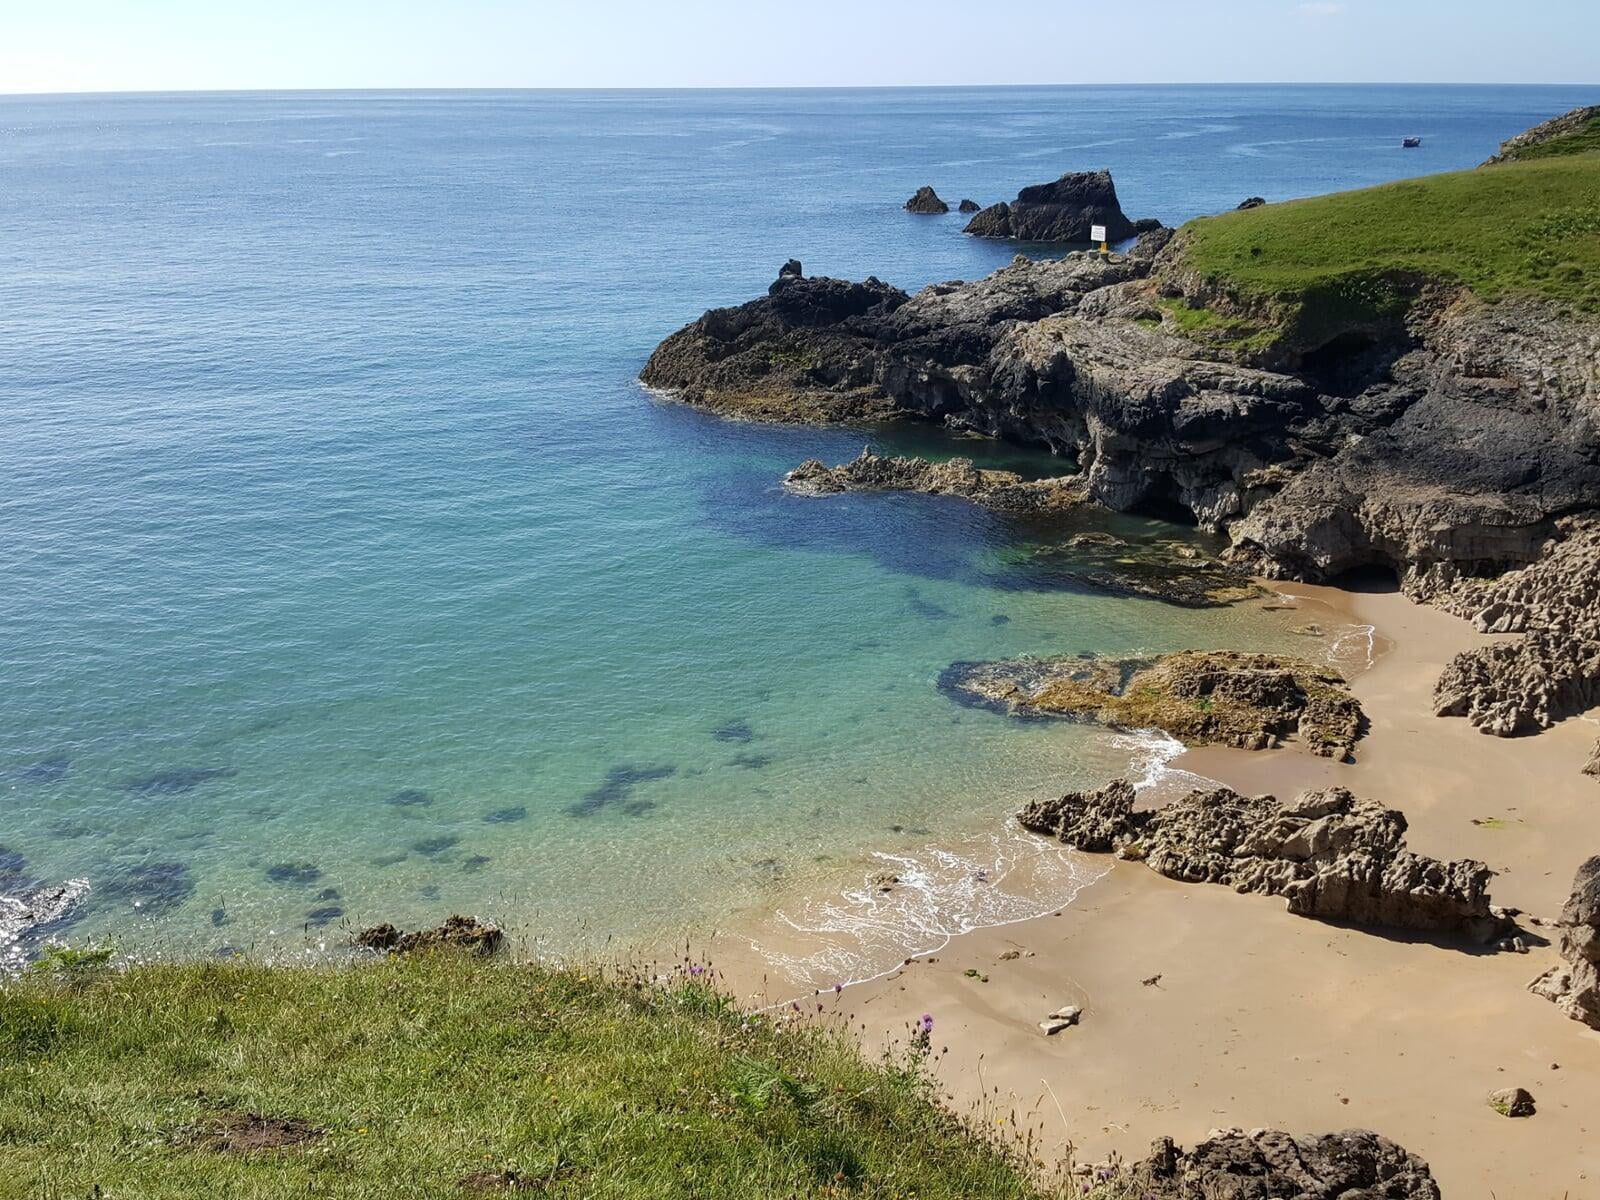 Broadhaven South is a sea swimmer's paradise